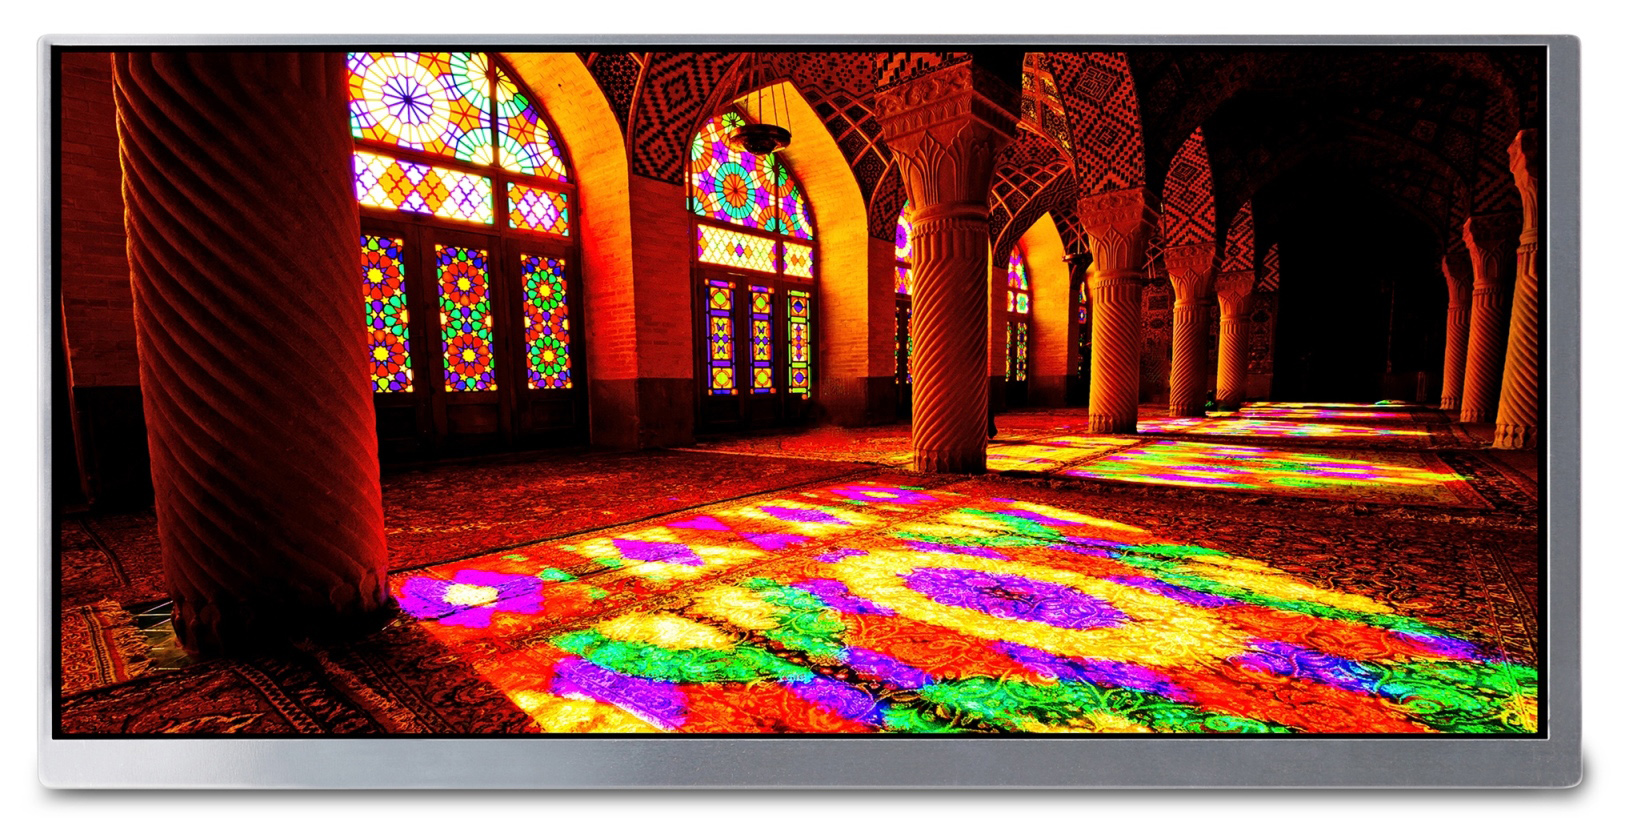 Tianma America has introduced a narrow-frame / wide-format 11.3-inch LCD (888 x 408) that is ideal for gaming applications. Photo: Tianma America, Inc.